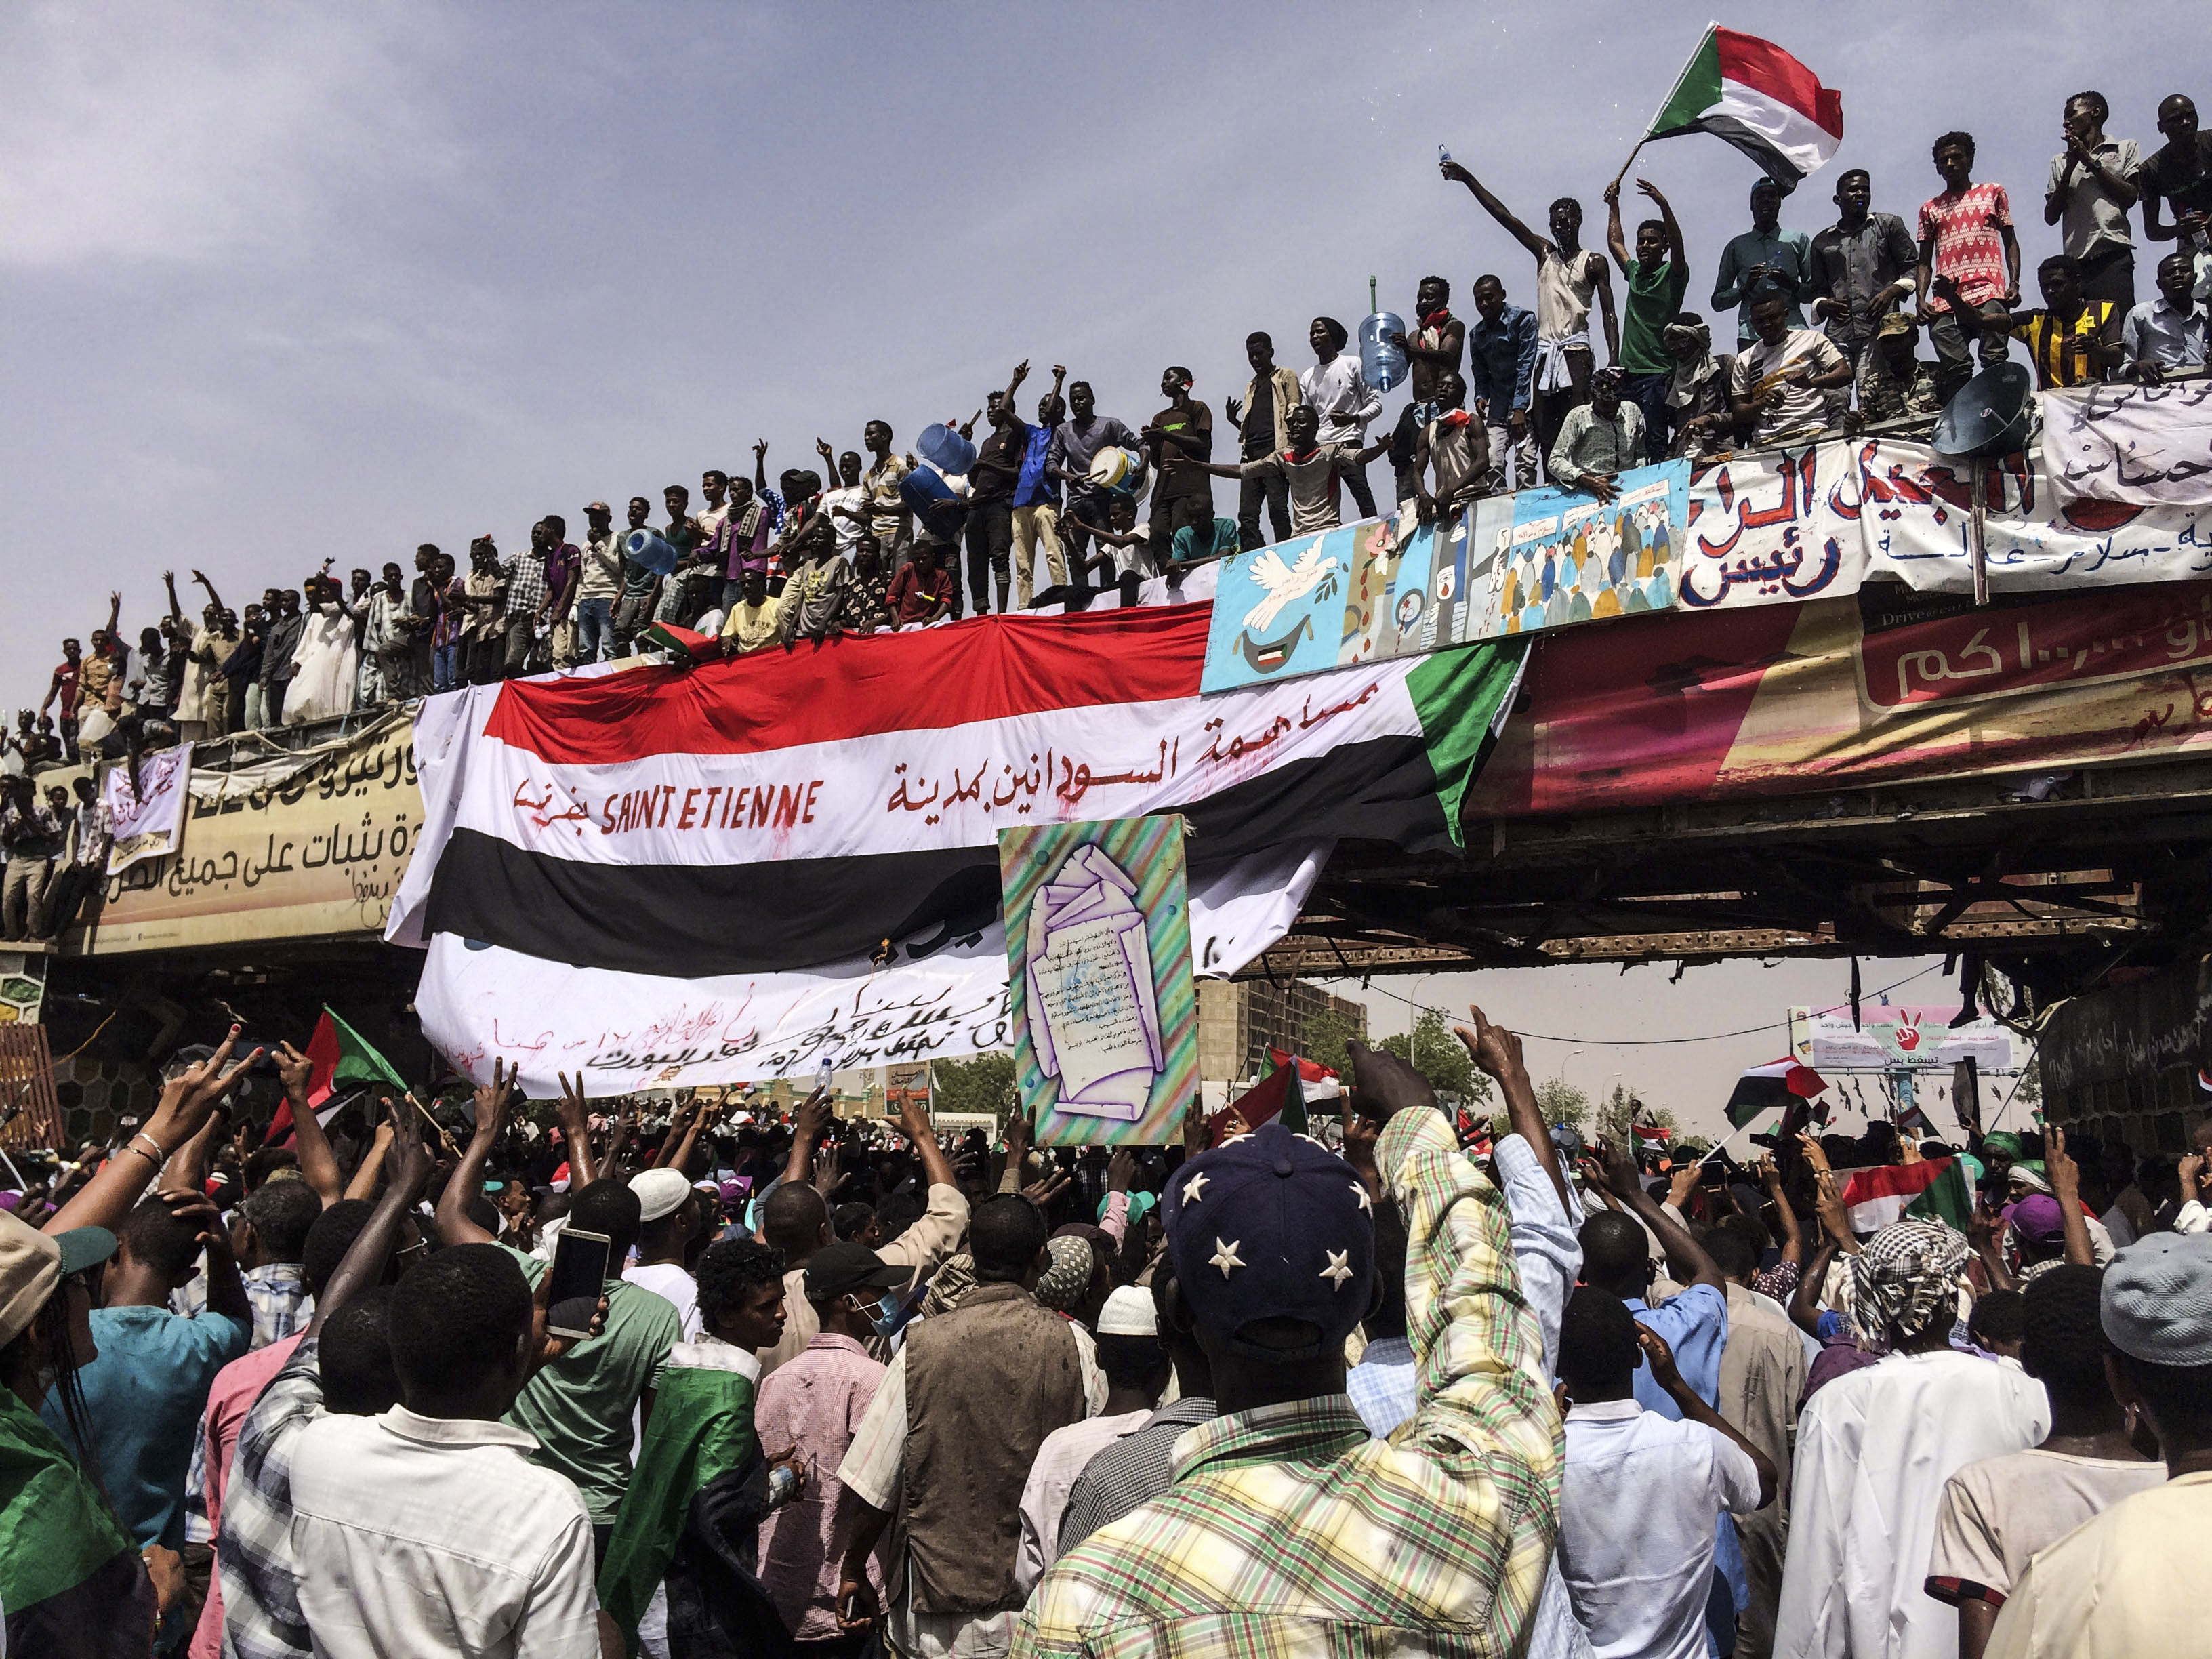 Sudan army removes leader, rejects al-Bashir extradition